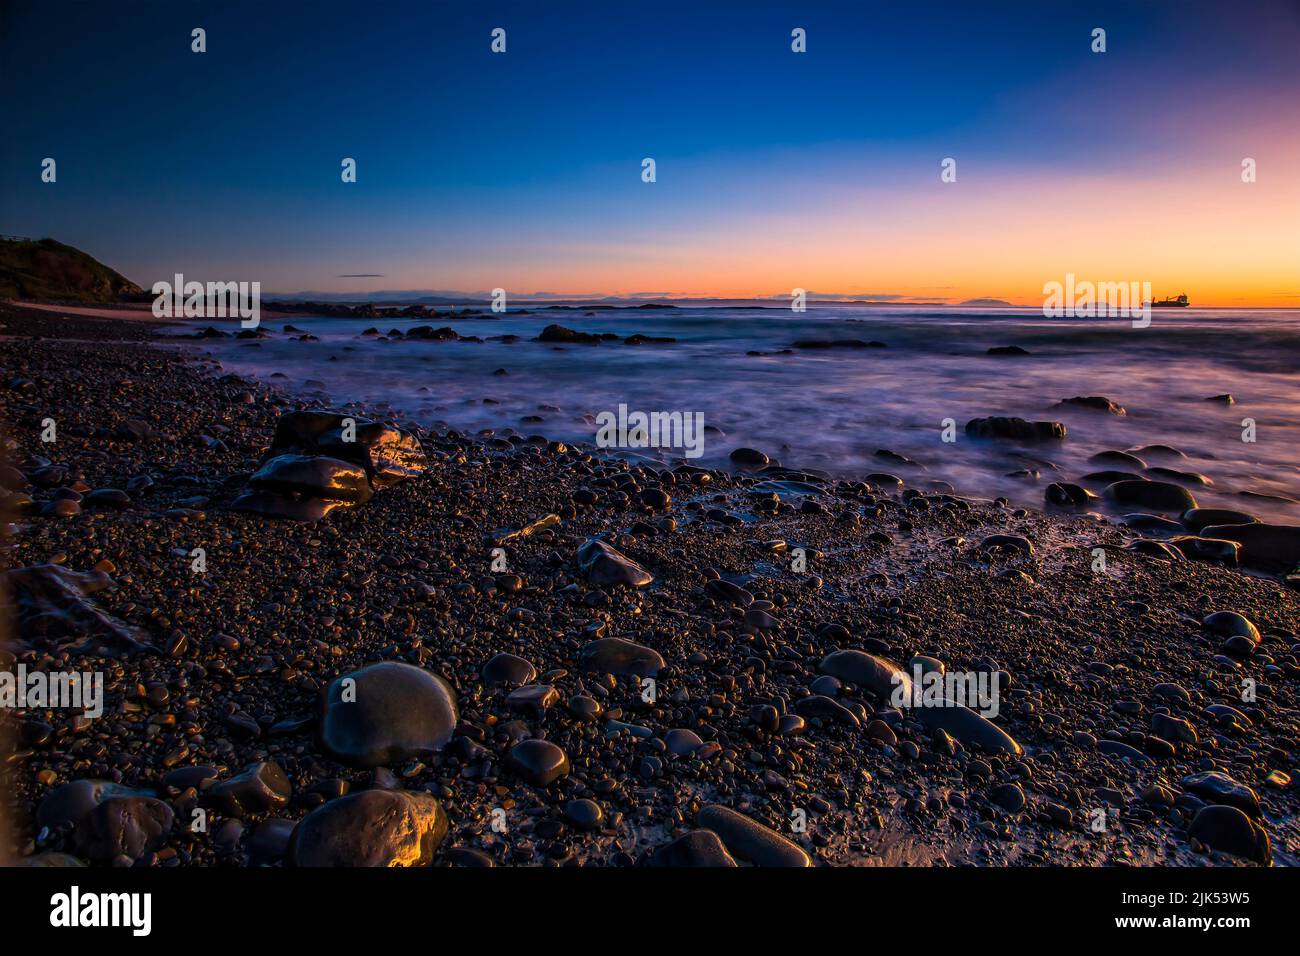 Wet rocks pebbles on pebbly beach in Forster town of Australia on Pacific coast at sunrise. Stock Photo